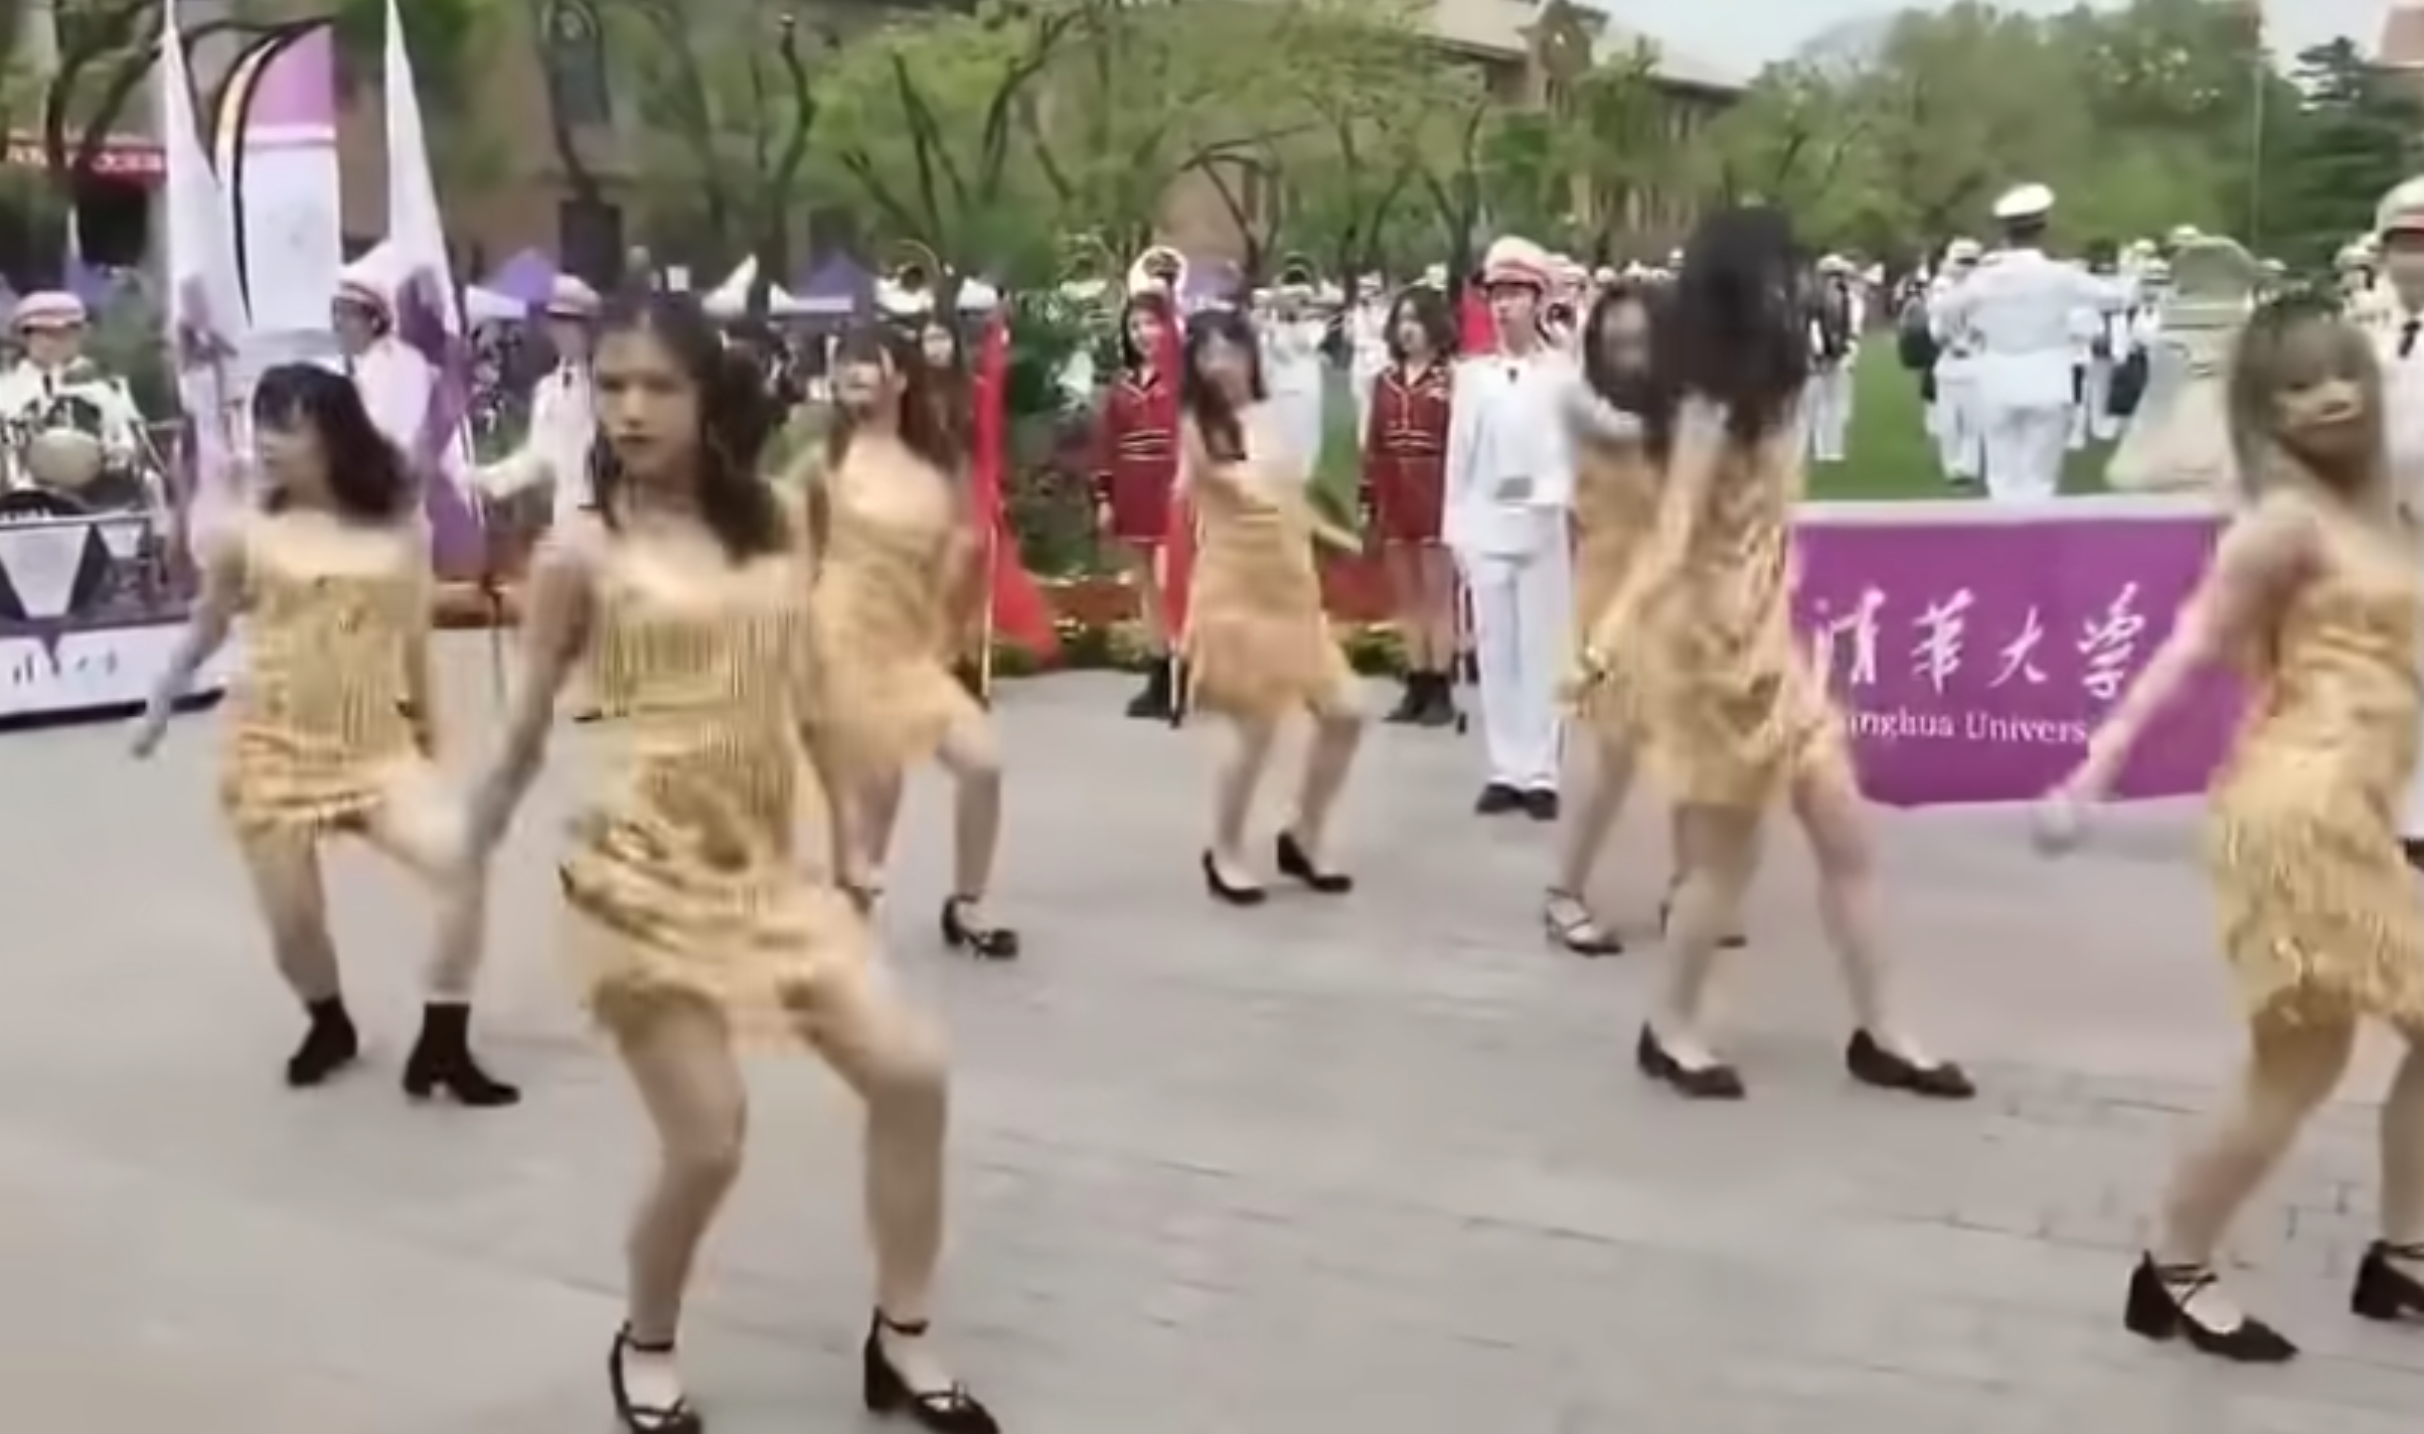 Misogynistic trolls band together to dunk on dance-loving young women at Tsinghua University